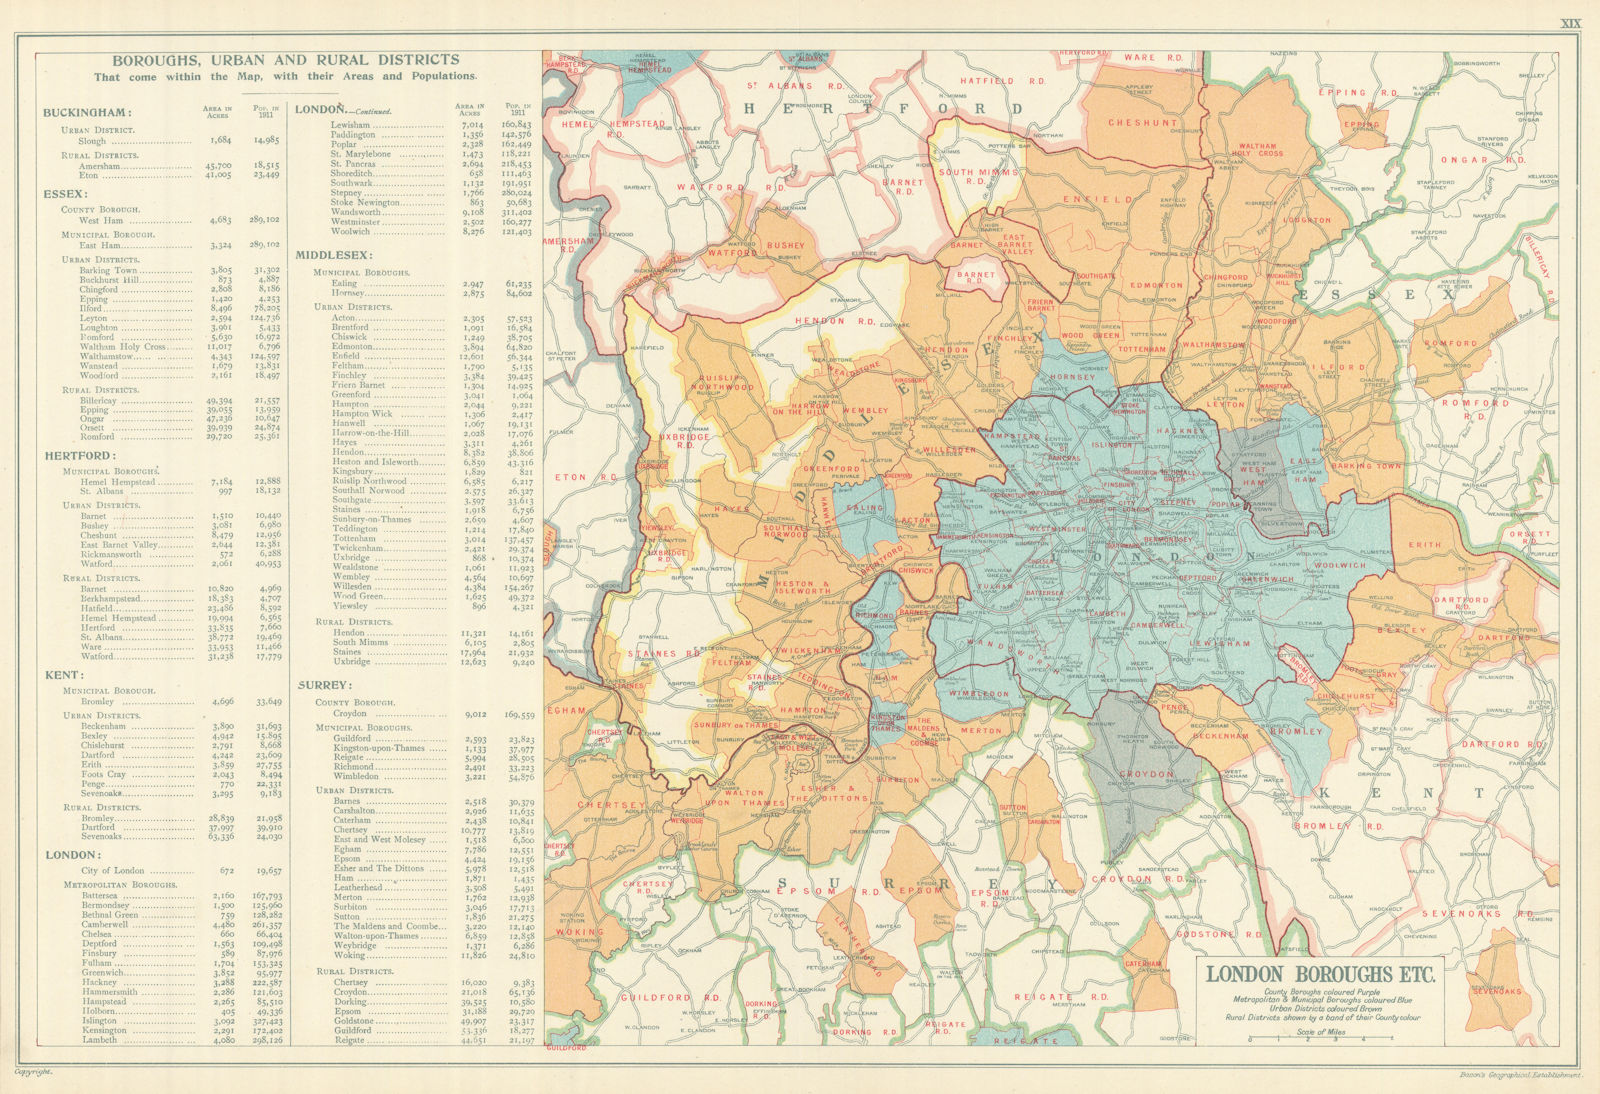 Associate Product LONDON showing Municipal Boroughs, Urban Districts & Rural areas. BACON 1919 map